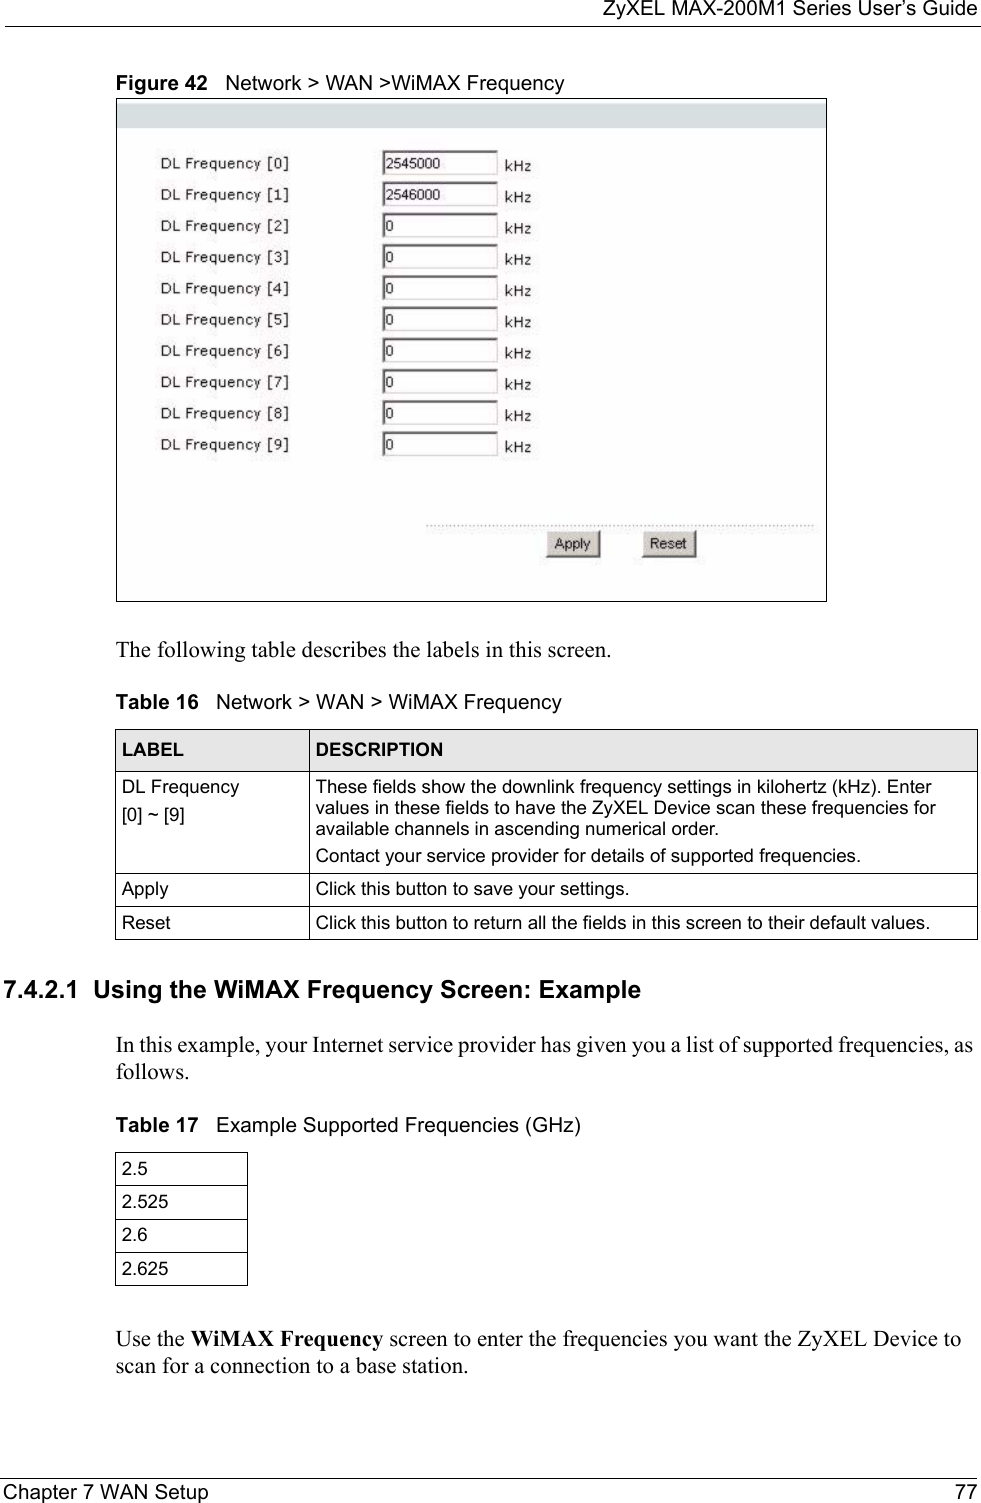 ZyXEL MAX-200M1 Series User’s GuideChapter 7 WAN Setup 77Figure 42   Network &gt; WAN &gt;WiMAX FrequencyThe following table describes the labels in this screen.7.4.2.1  Using the WiMAX Frequency Screen: ExampleIn this example, your Internet service provider has given you a list of supported frequencies, as follows.  Use the WiMAX Frequency screen to enter the frequencies you want the ZyXEL Device to scan for a connection to a base station. Table 16   Network &gt; WAN &gt; WiMAX FrequencyLABEL DESCRIPTIONDL Frequency [0] ~ [9]These fields show the downlink frequency settings in kilohertz (kHz). Enter values in these fields to have the ZyXEL Device scan these frequencies for available channels in ascending numerical order.  Contact your service provider for details of supported frequencies.Apply Click this button to save your settings.Reset Click this button to return all the fields in this screen to their default values.Table 17   Example Supported Frequencies (GHz)2.5 2.5252.62.625